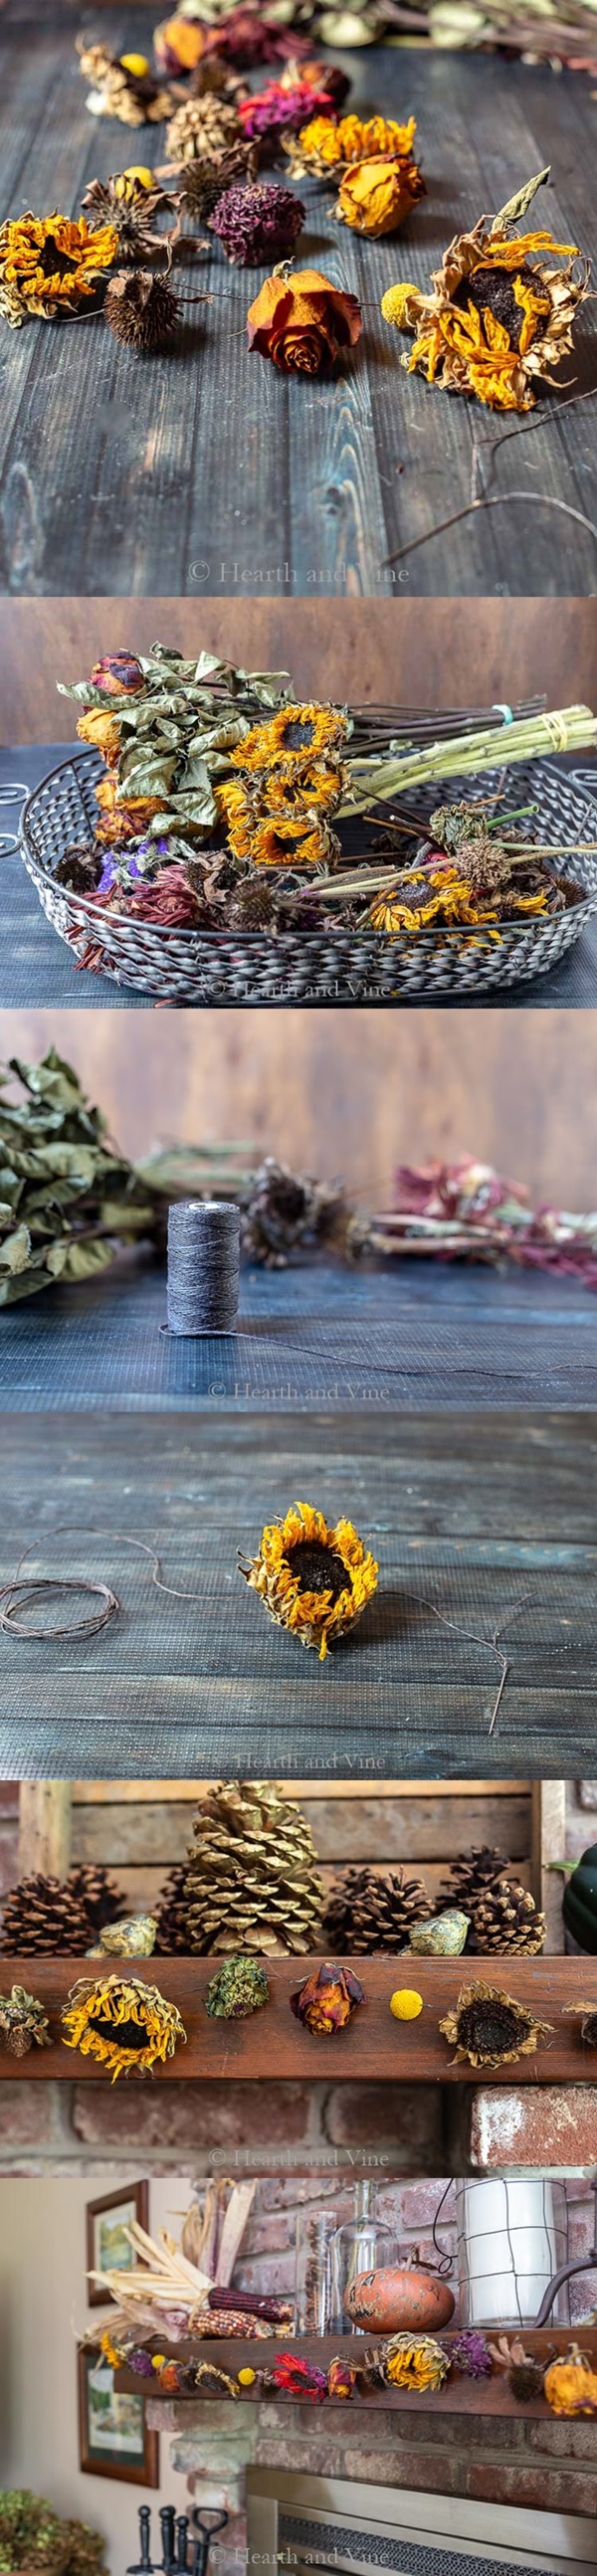 DIY Dried And Pressed Flower Home Decorations